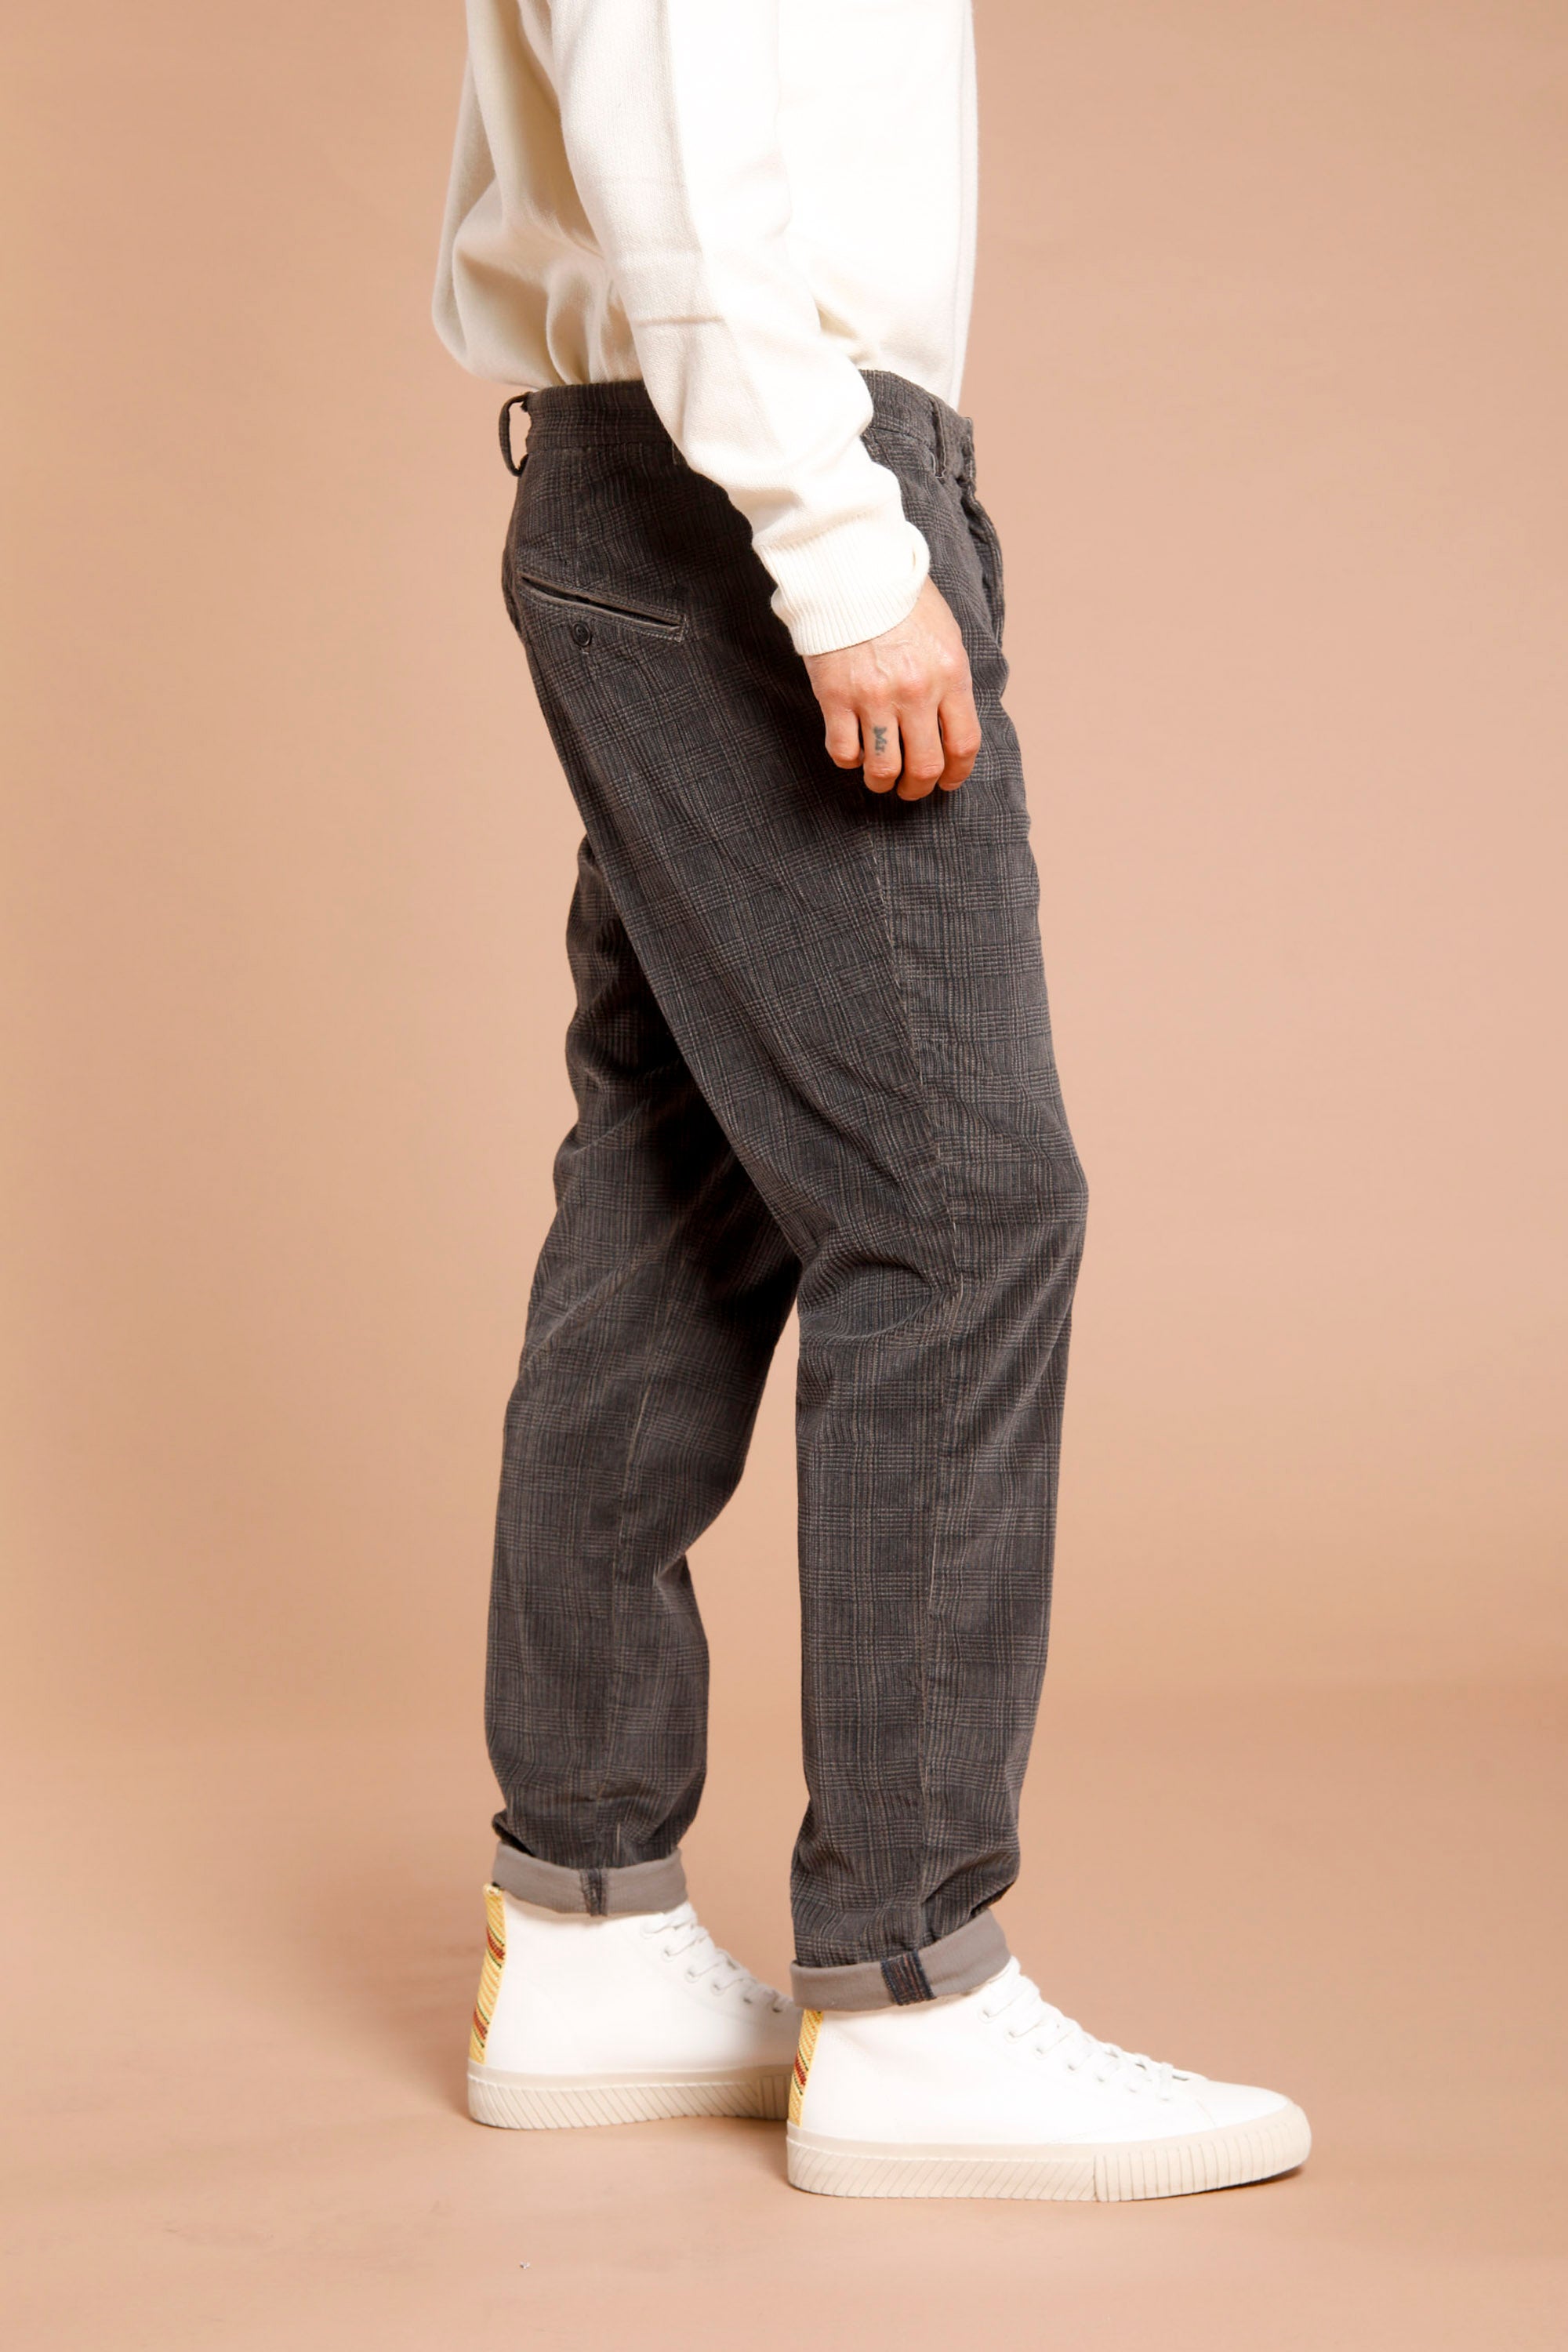 Osaka Style man velvet chino pant with galles pattern carrot fit